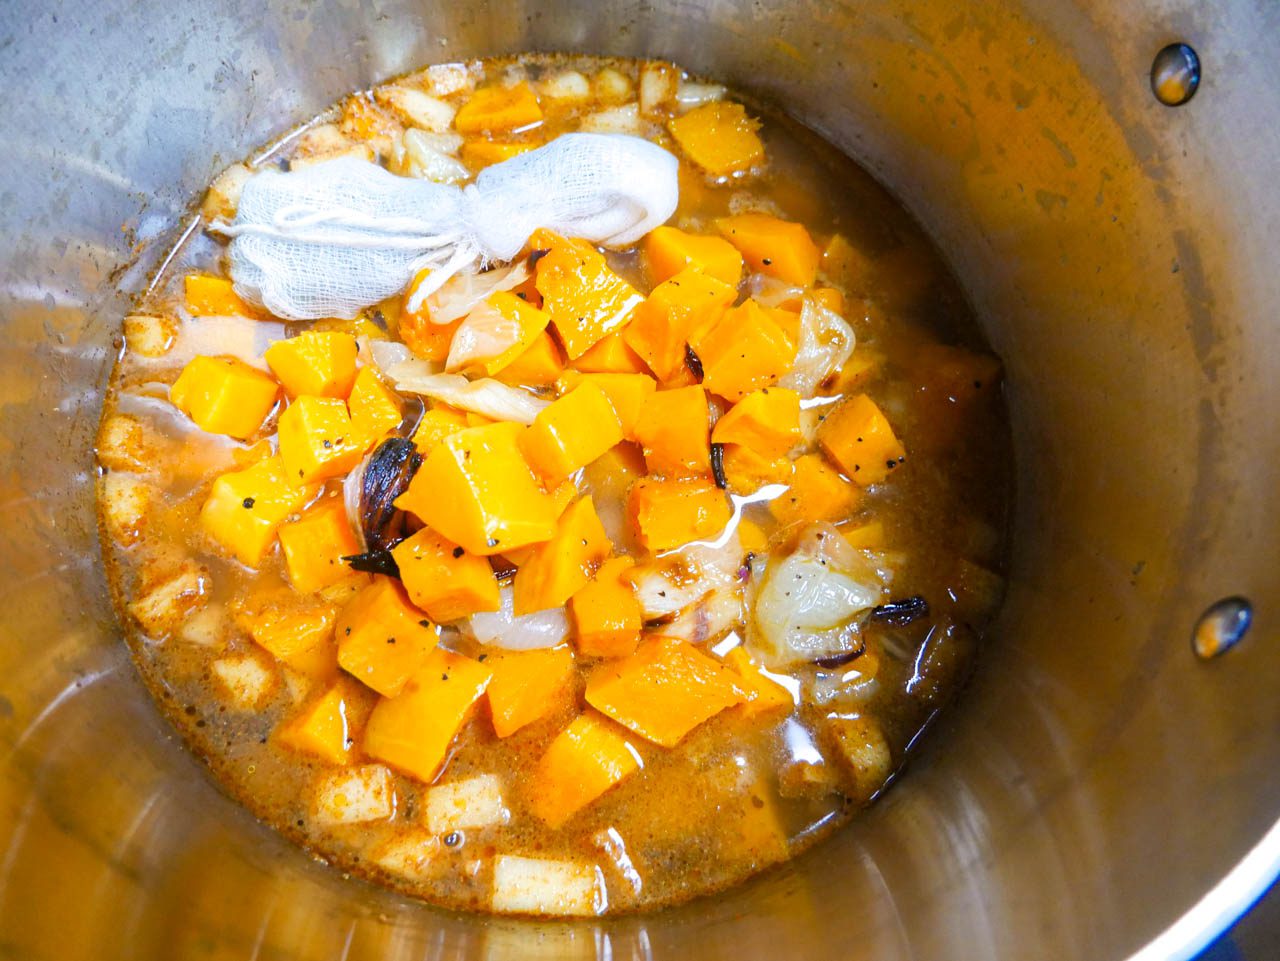 Butternut squash soup ingredients cooking in pot with bouquet garni